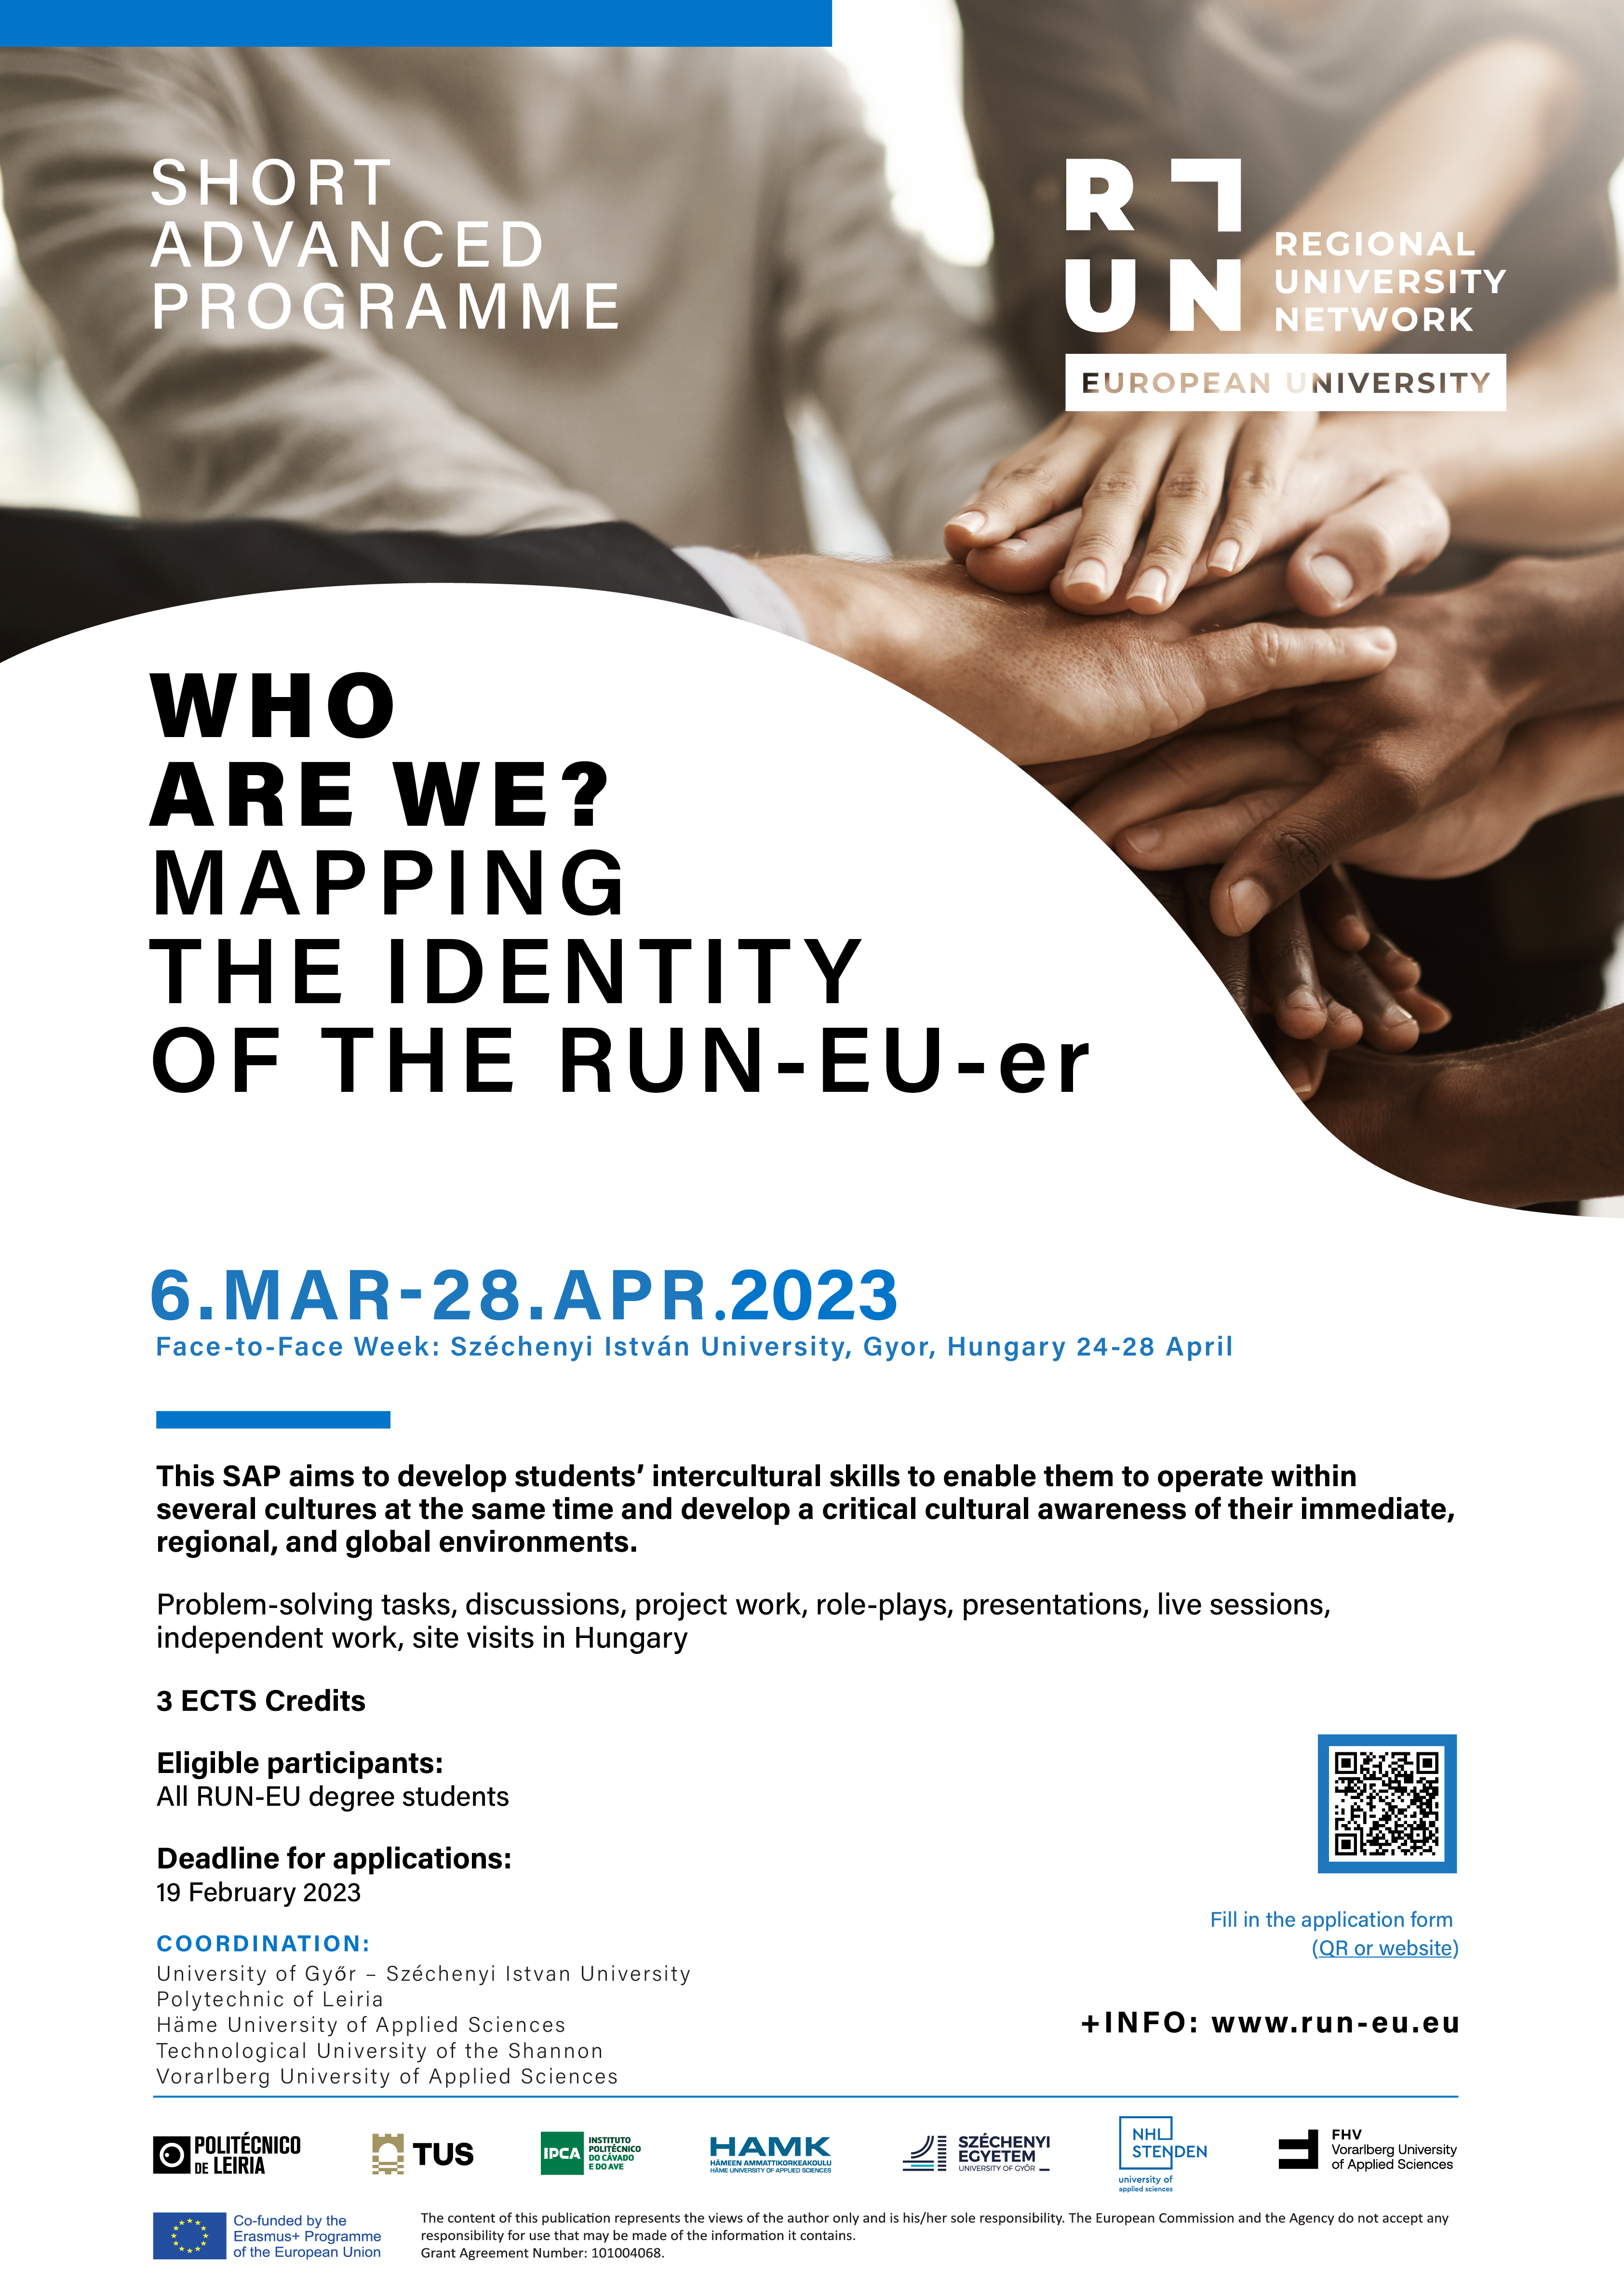 WHO ARE WE? MAPPING THE IDENTITY OF THE RUN-EU-ER 